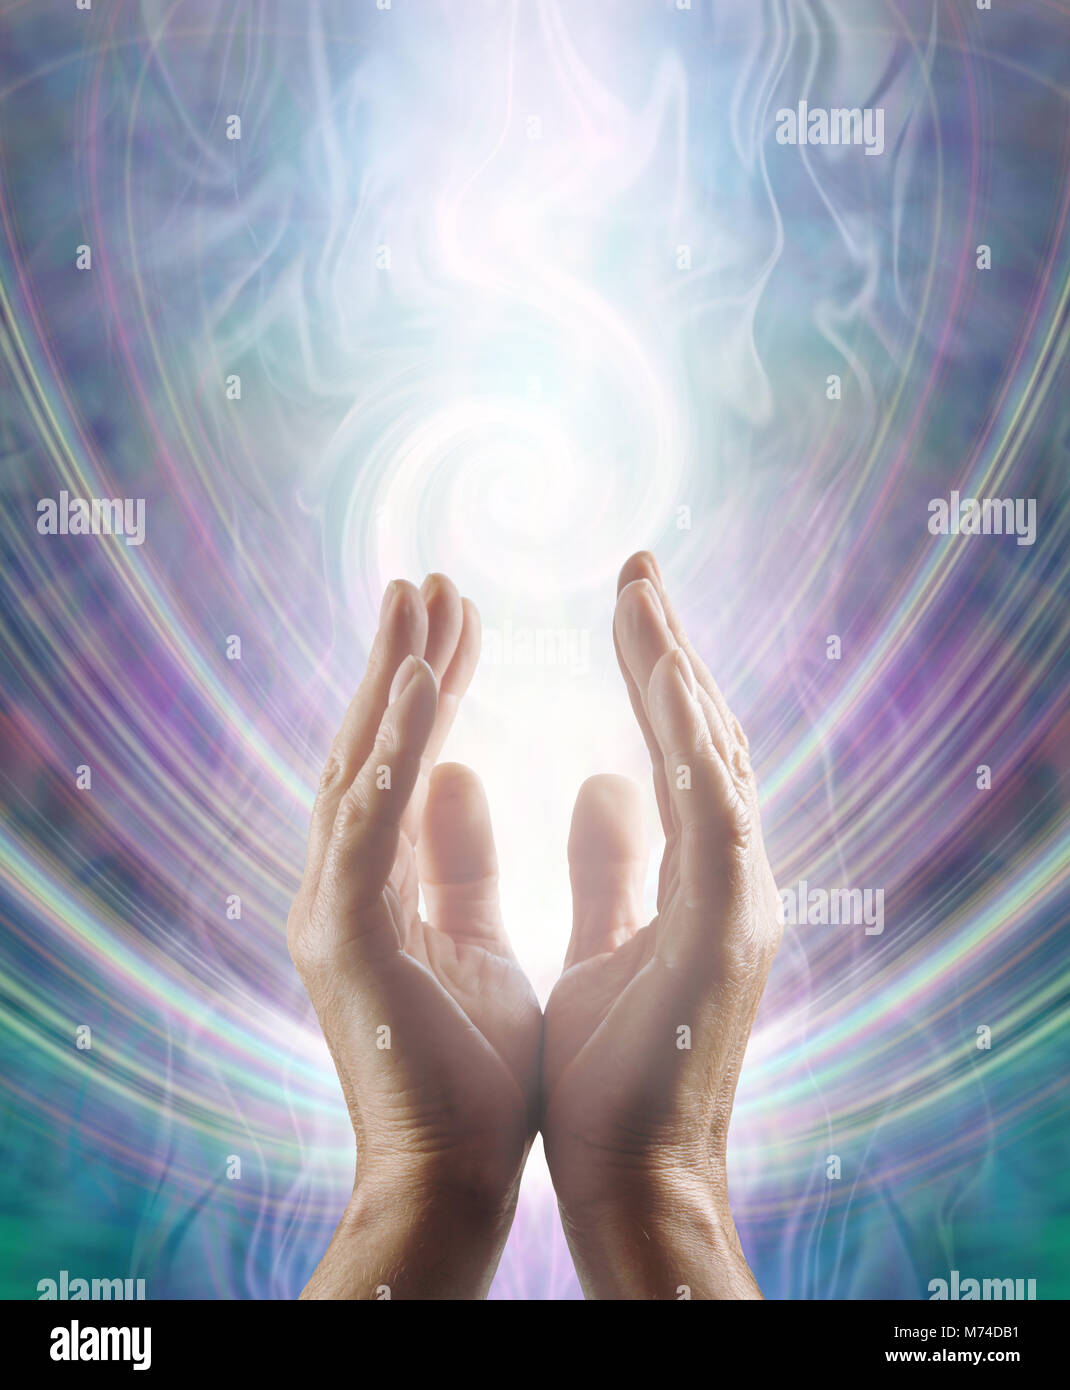 Sensing Spiralling Healing Energy - male  hands reaching up and sensing an ethereal spiralling white light flowing energy form with copy space Stock Photo